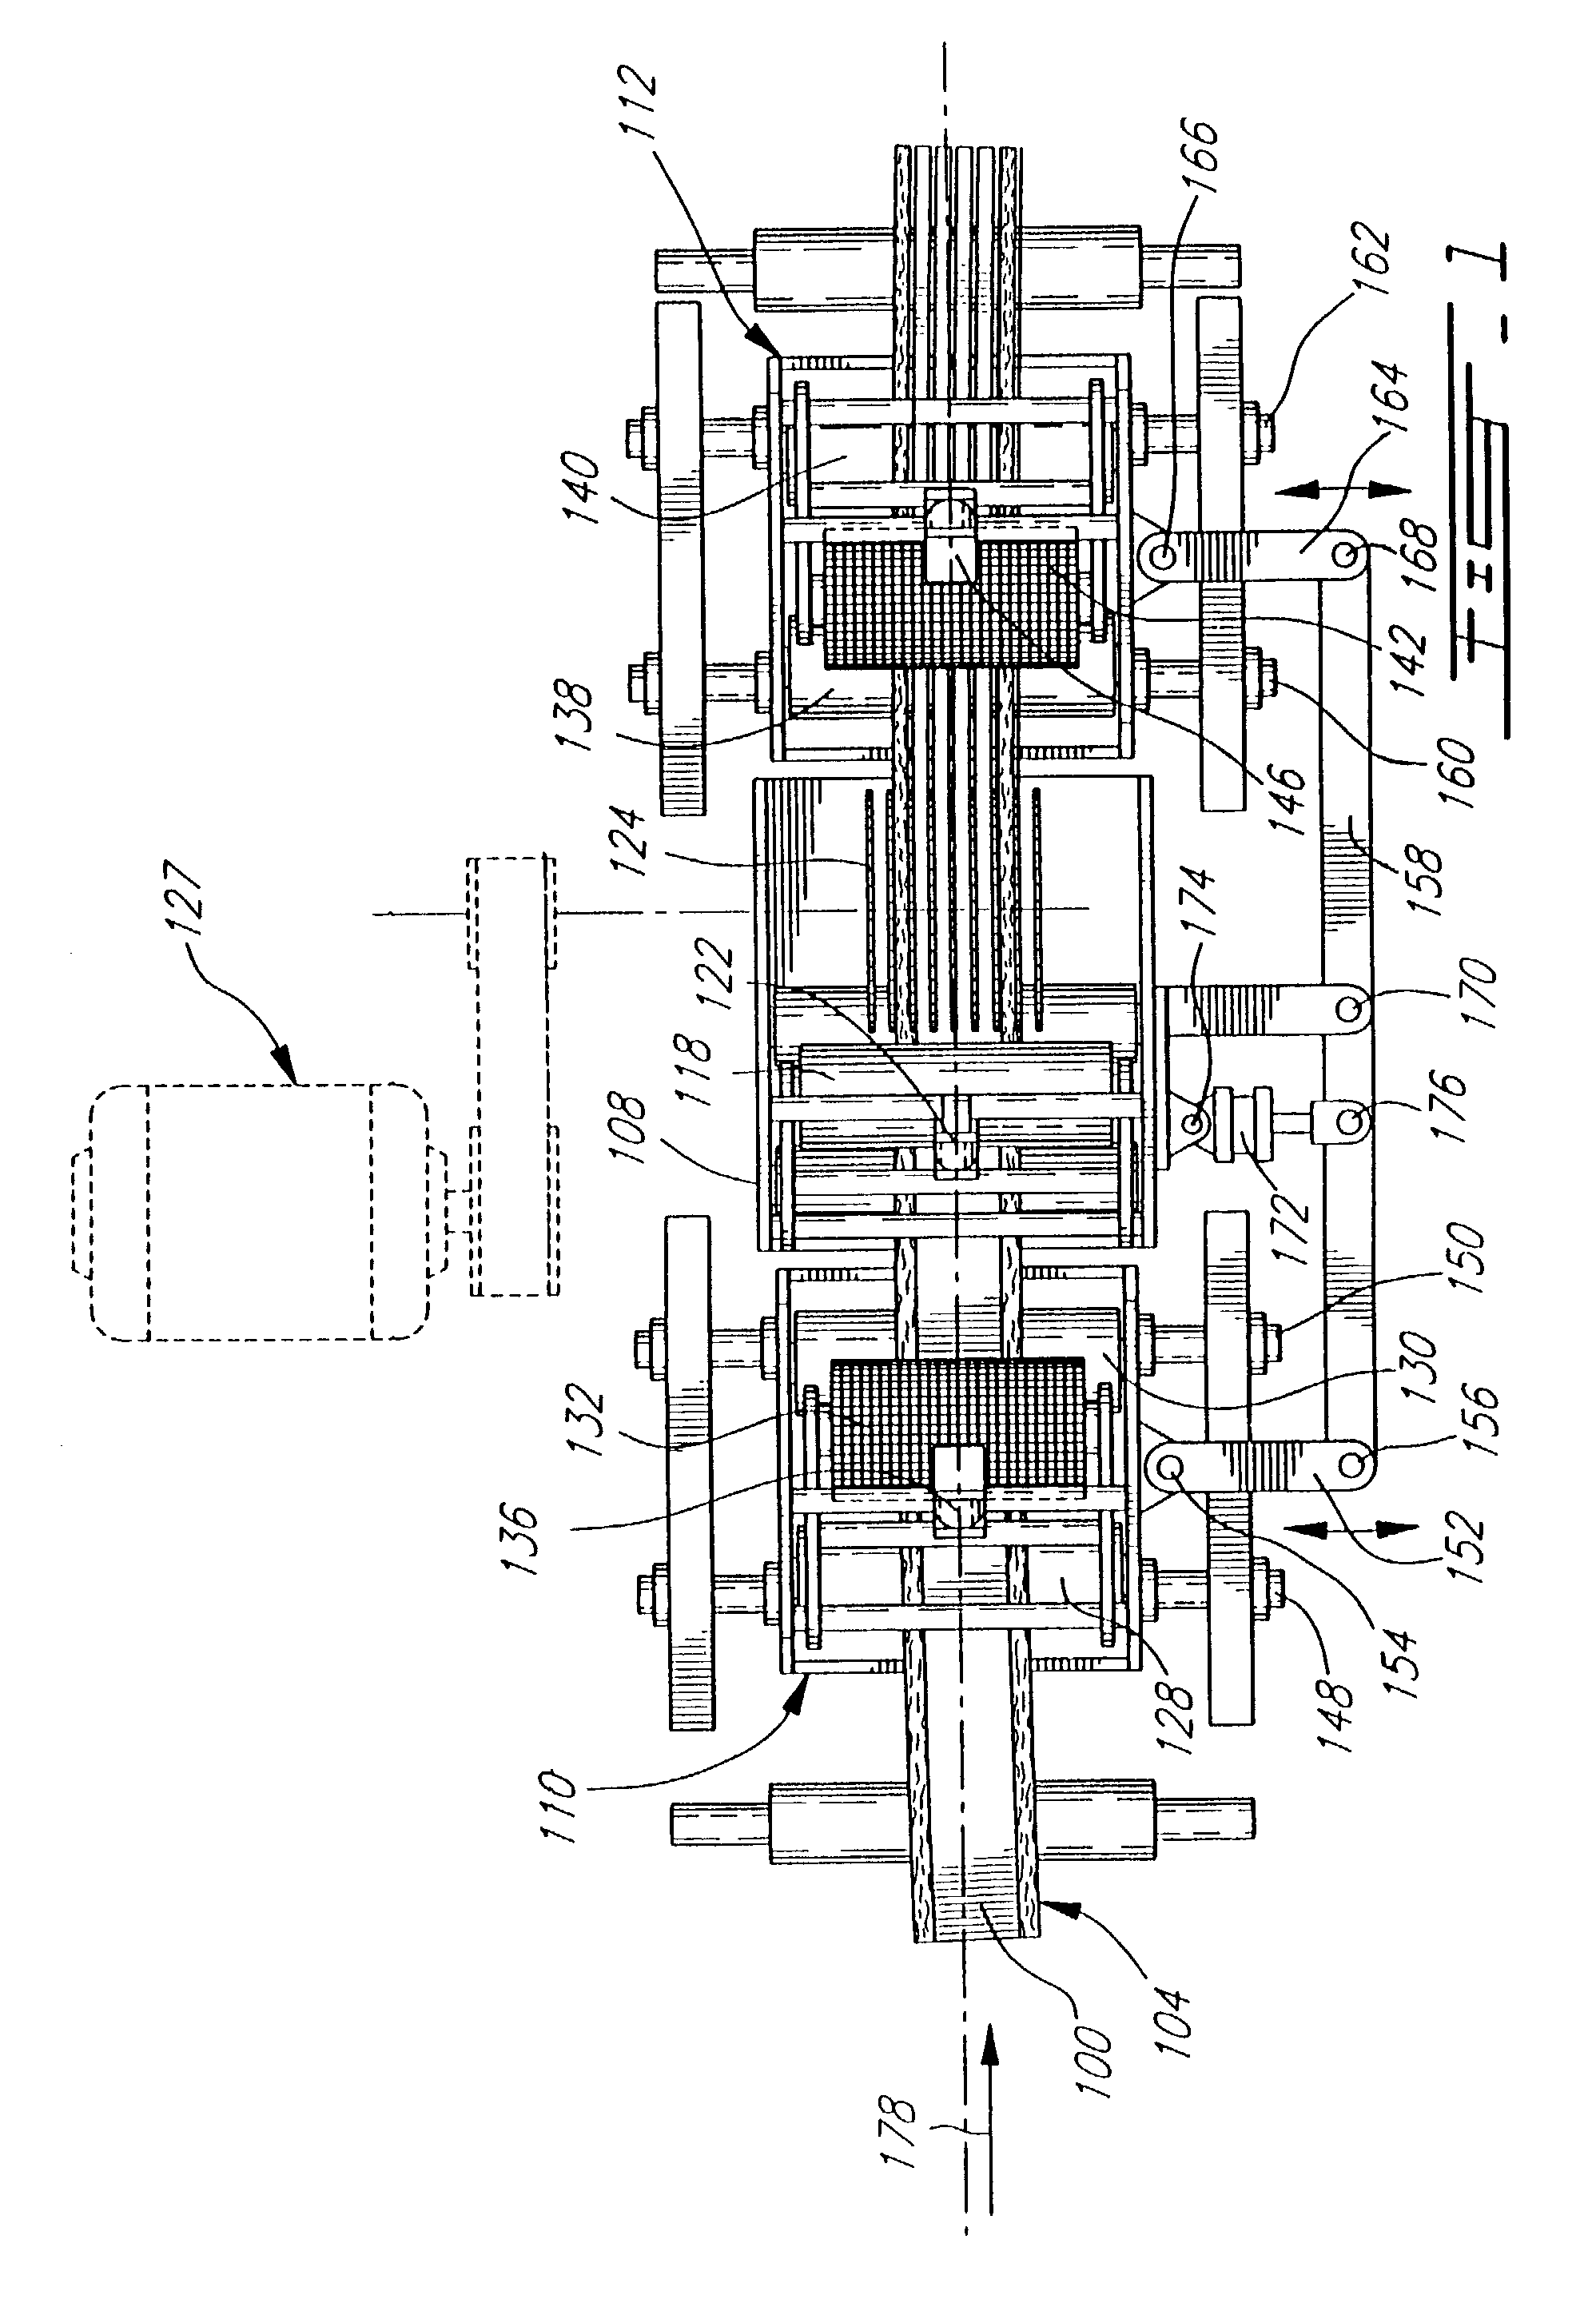 Apparatus for controlled curved sawing or cutting of two-faced cants